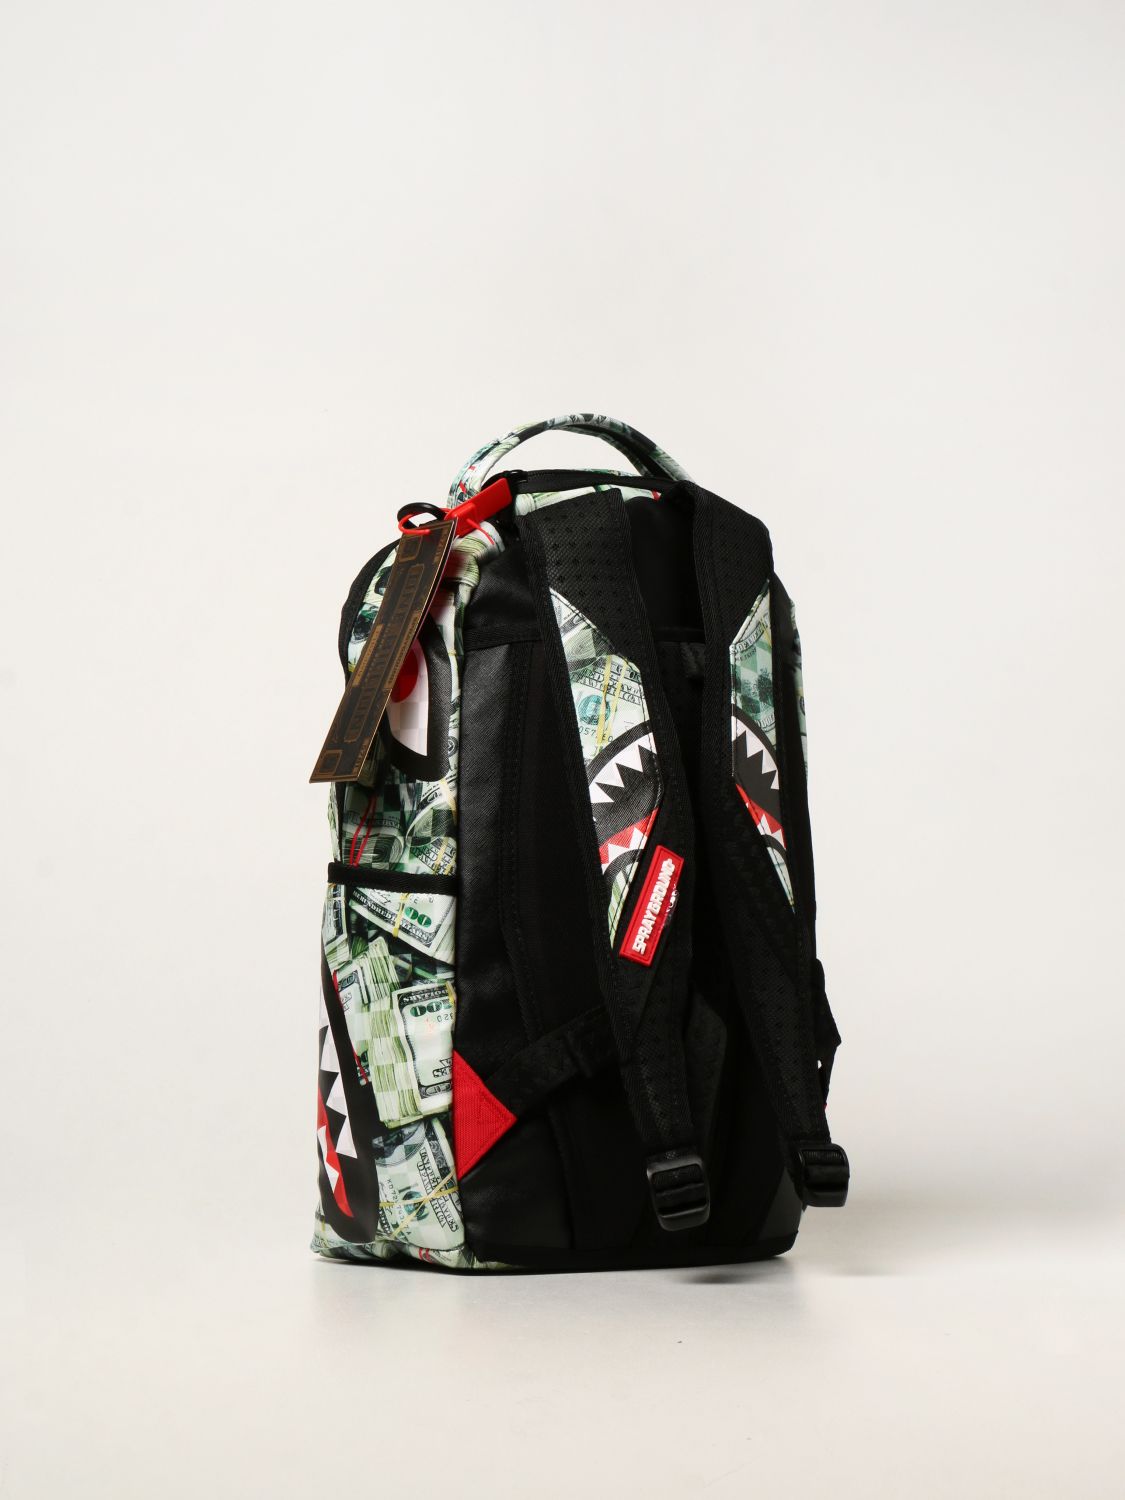 Sprayground Backpack In Vegan Leather With Shark Mouth In Black